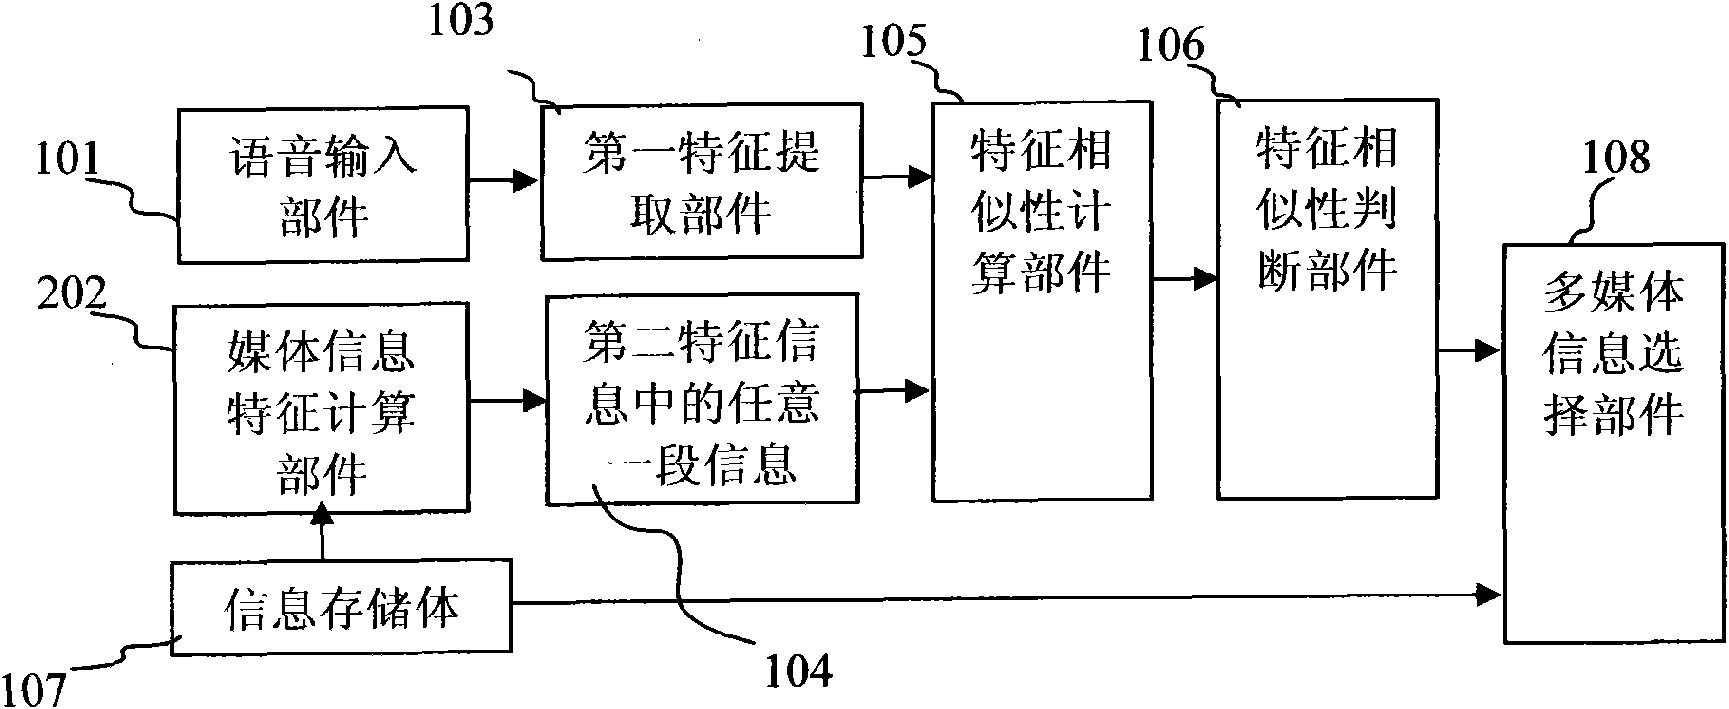 Media broadcasting device and media operating method